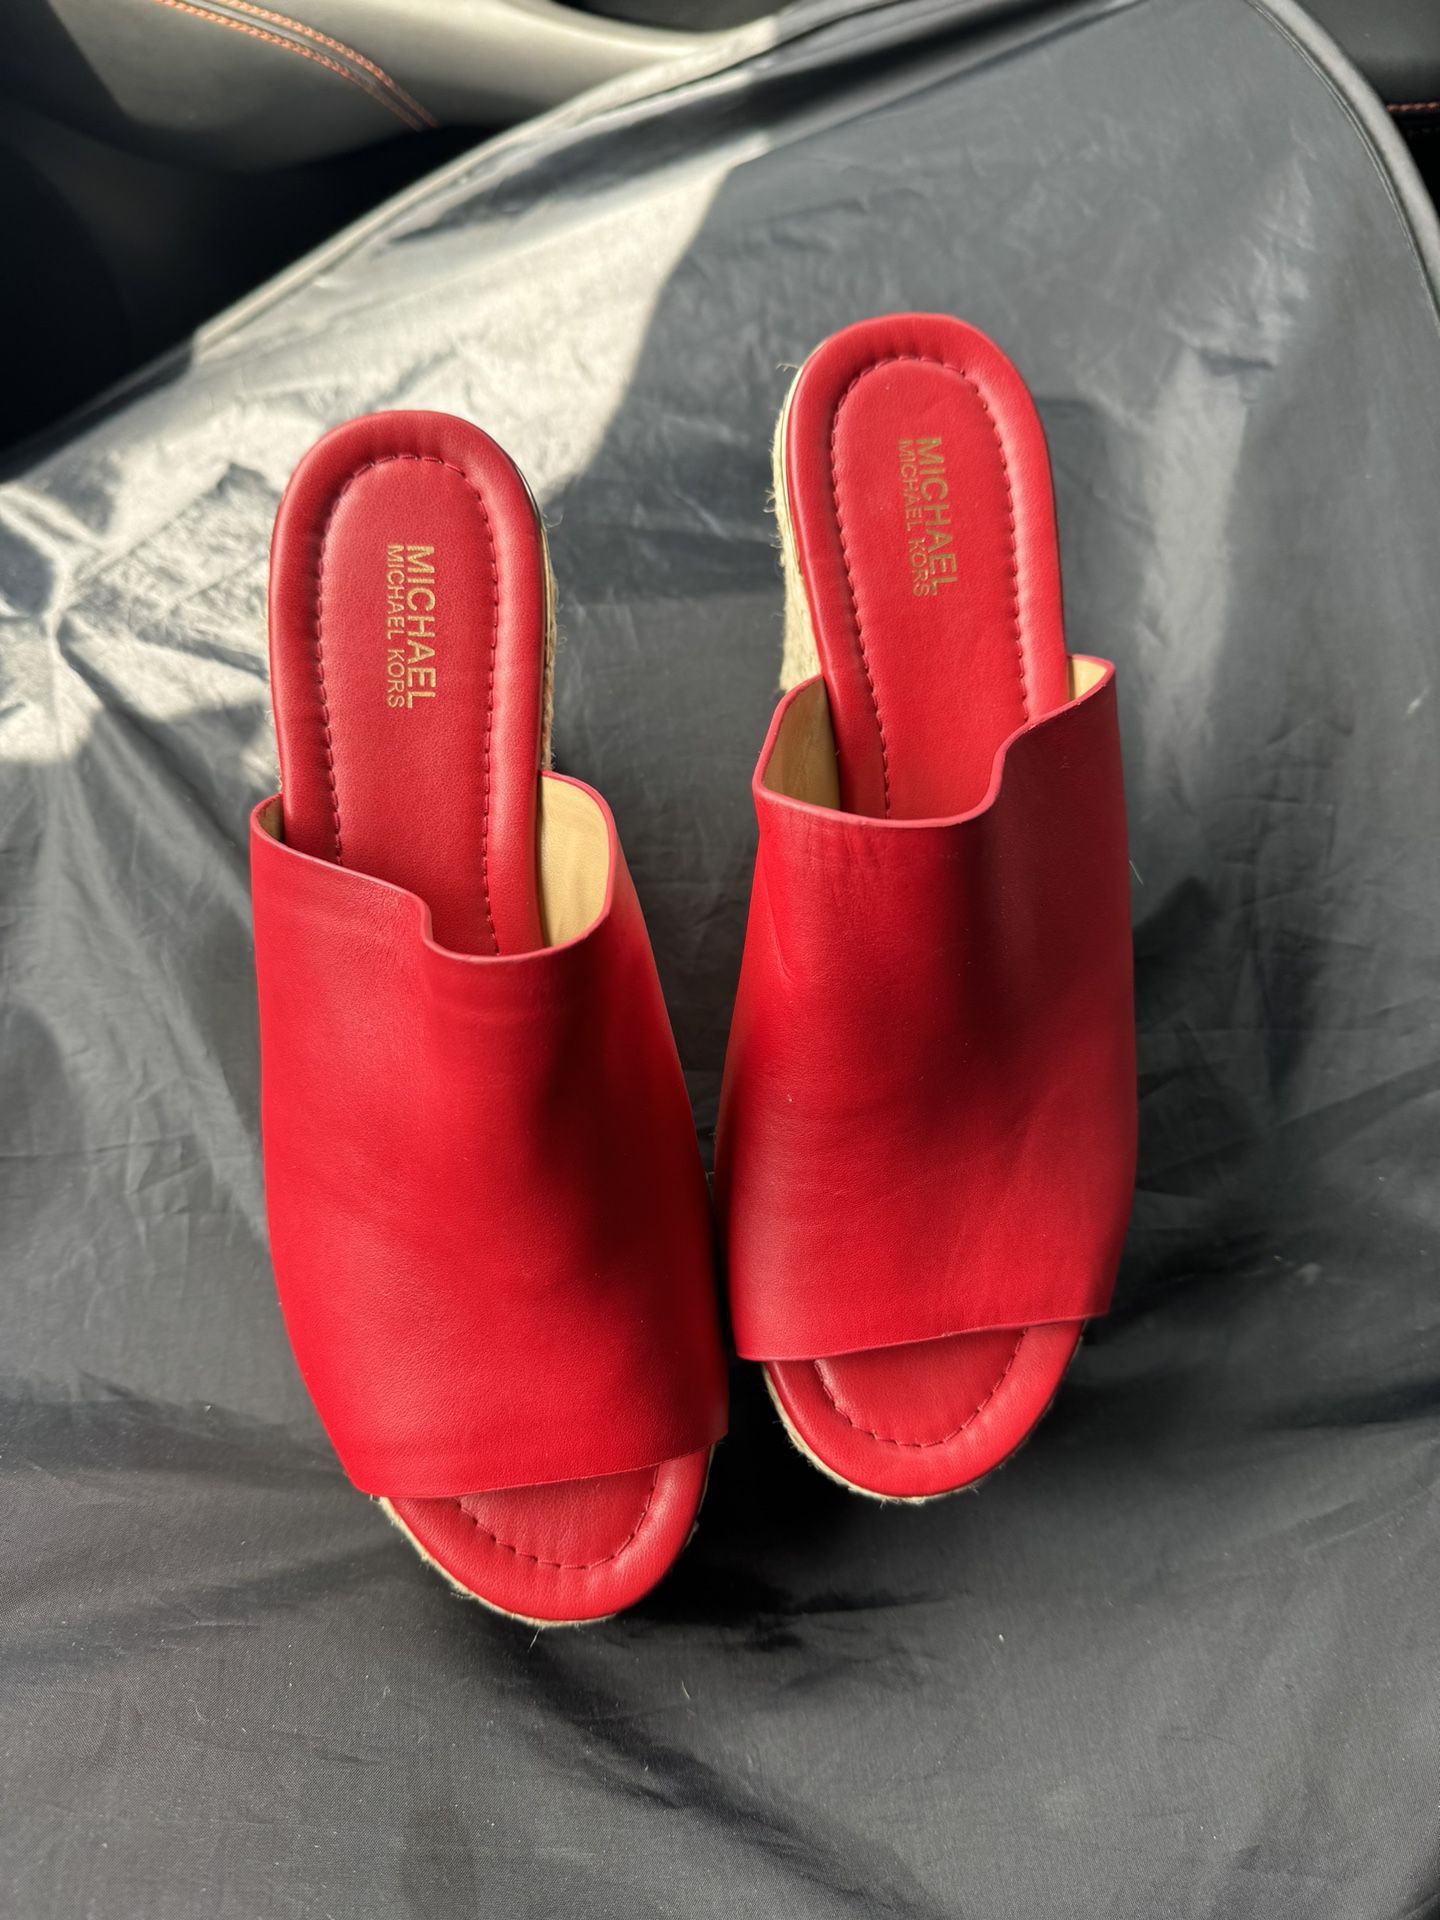 Red Michael Kors Shoes Size 7.5